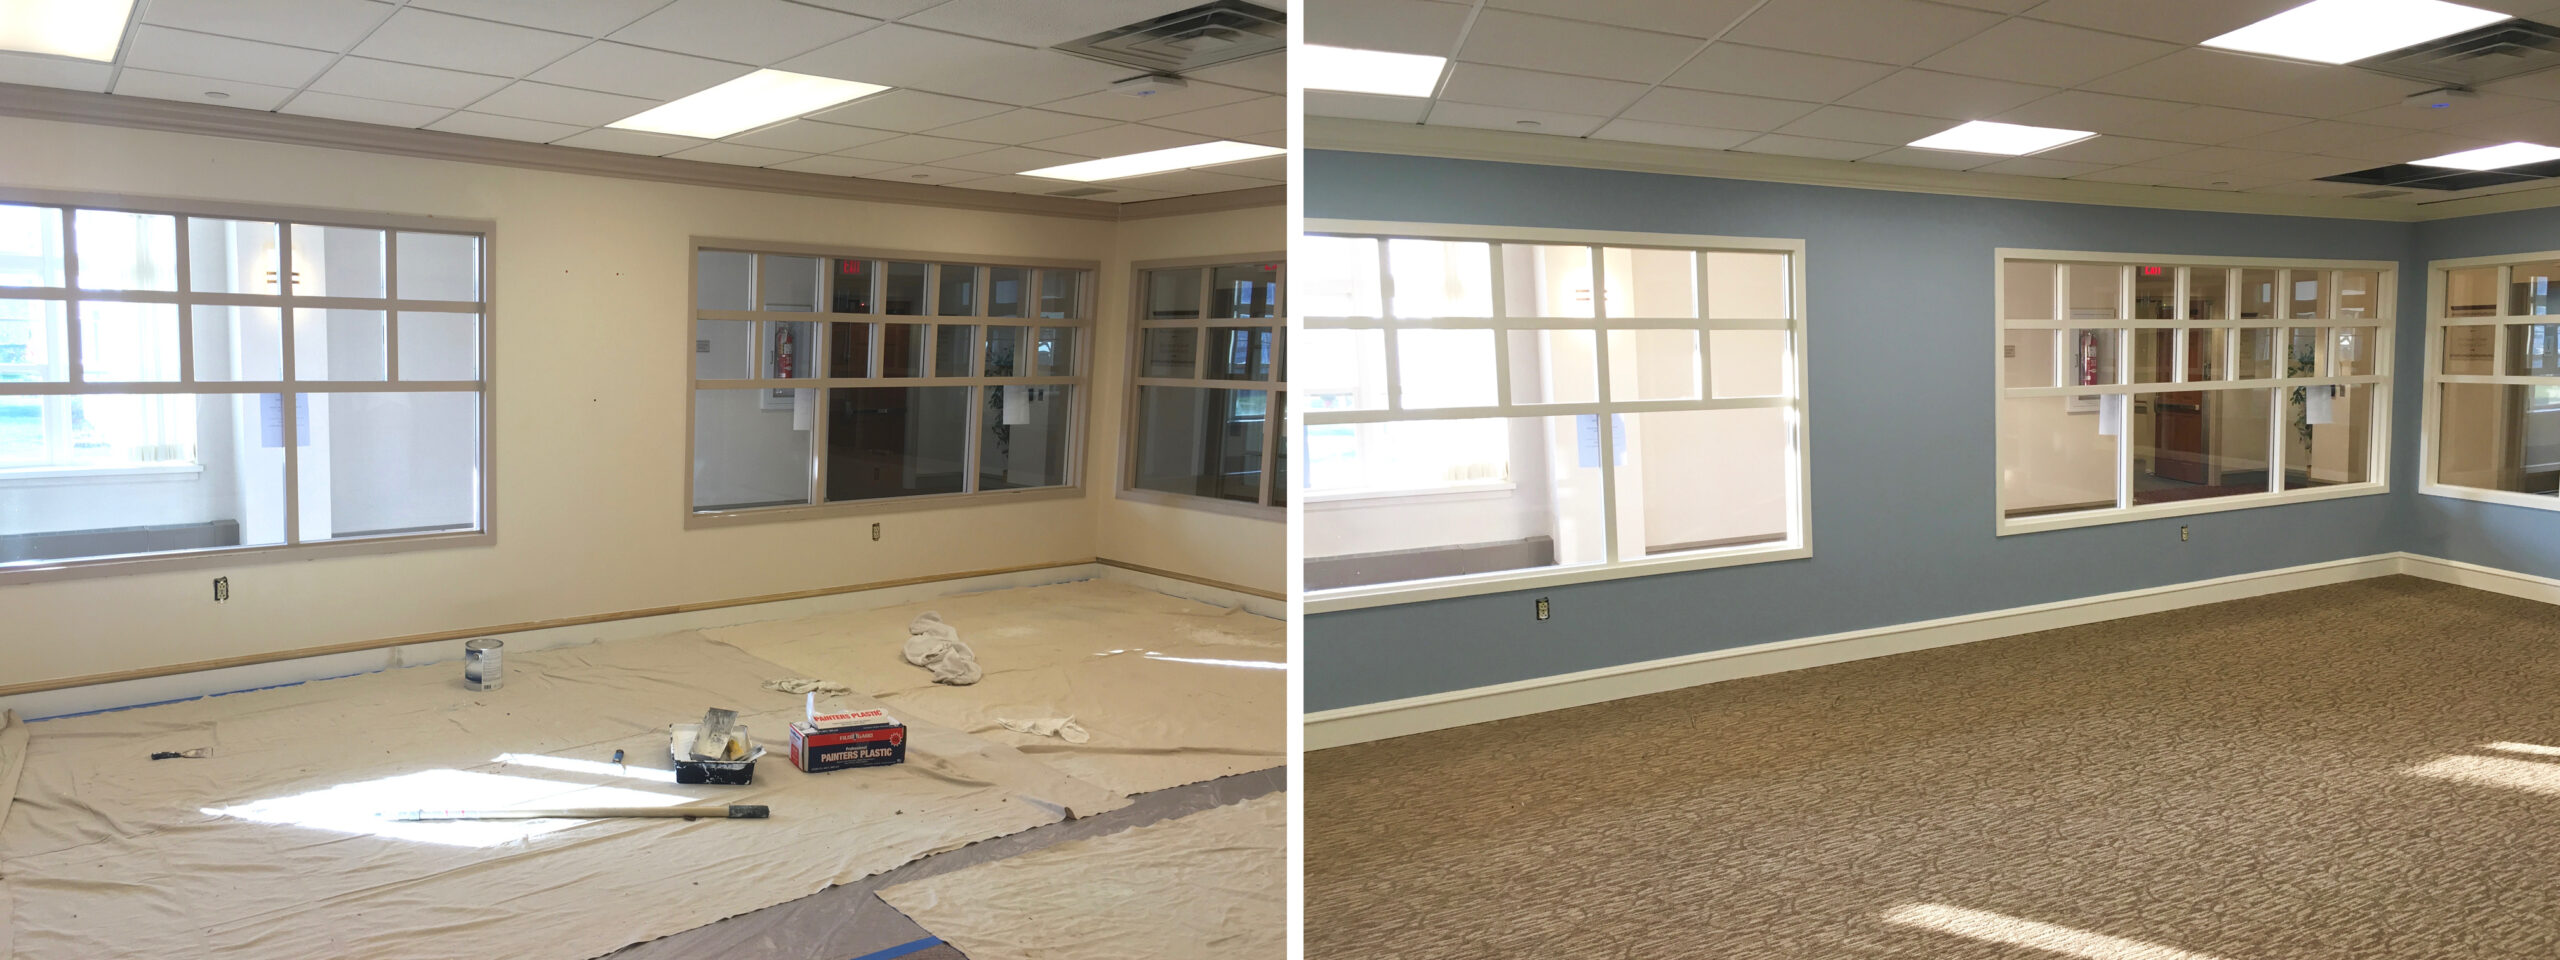 Commercial painting before and after